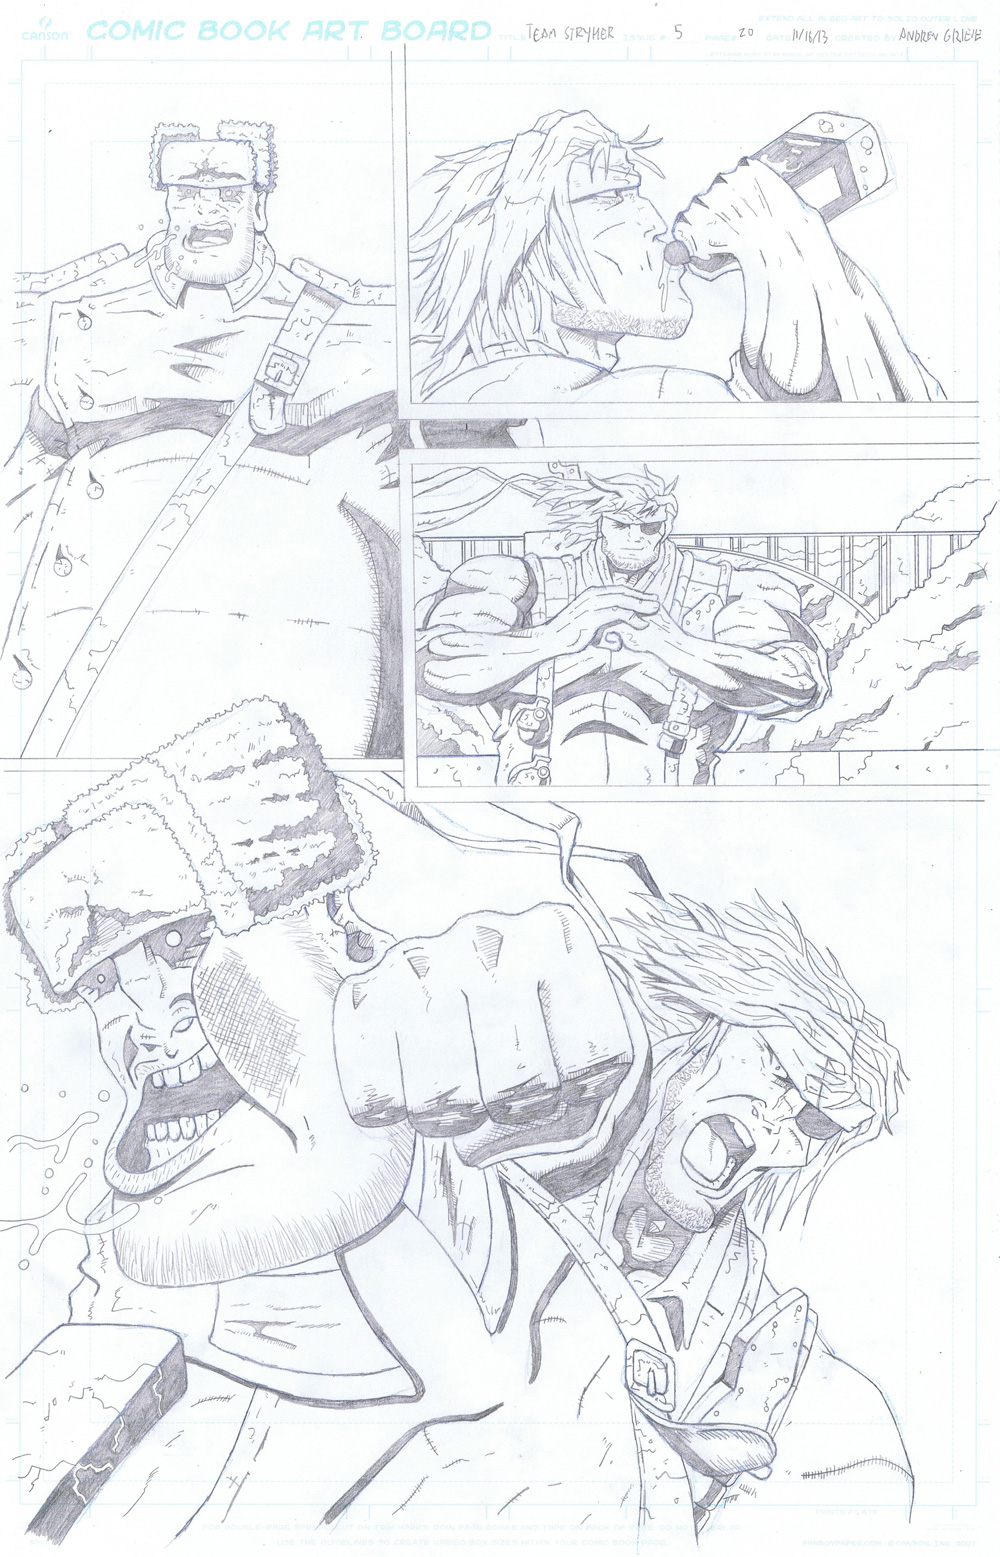 MISSION 005: PAGE 20 PENCIL